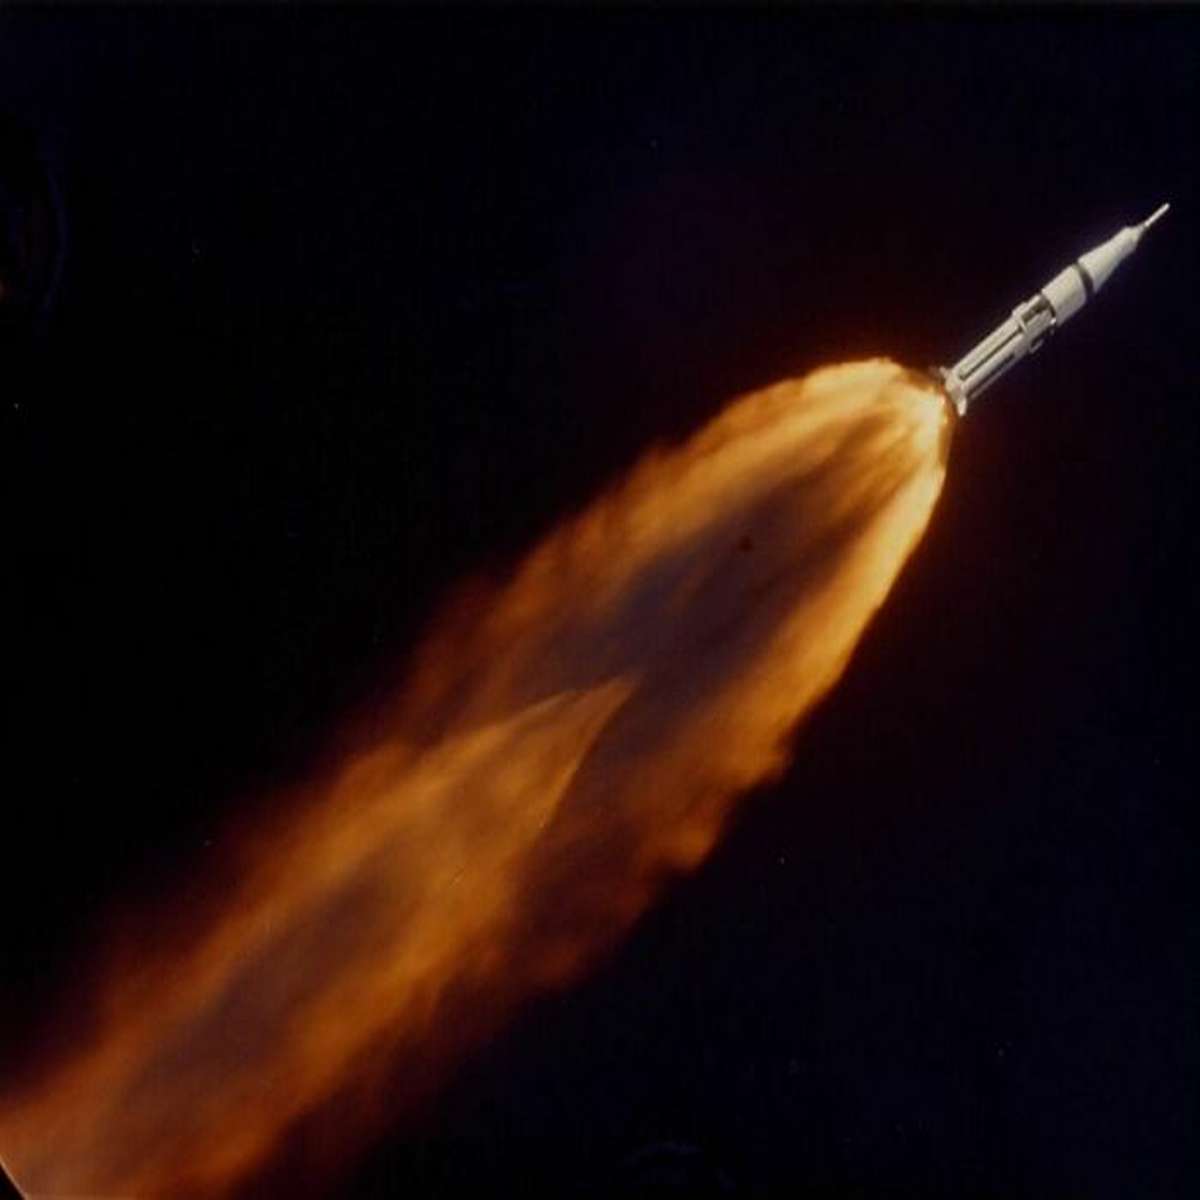 The Saturn Launch Vehicle Carrying The Apollo 7 Spacecraft, 1968. Apollo 7 Was The First Crewed Flight In Nasa's Apollo Program, And Saw The Resumption Of Human Spaceflight By The Agency After The Fire That Killed The Three Apollo 1 Astronauts During A Launch Rehearsal Test On January 27, 1967